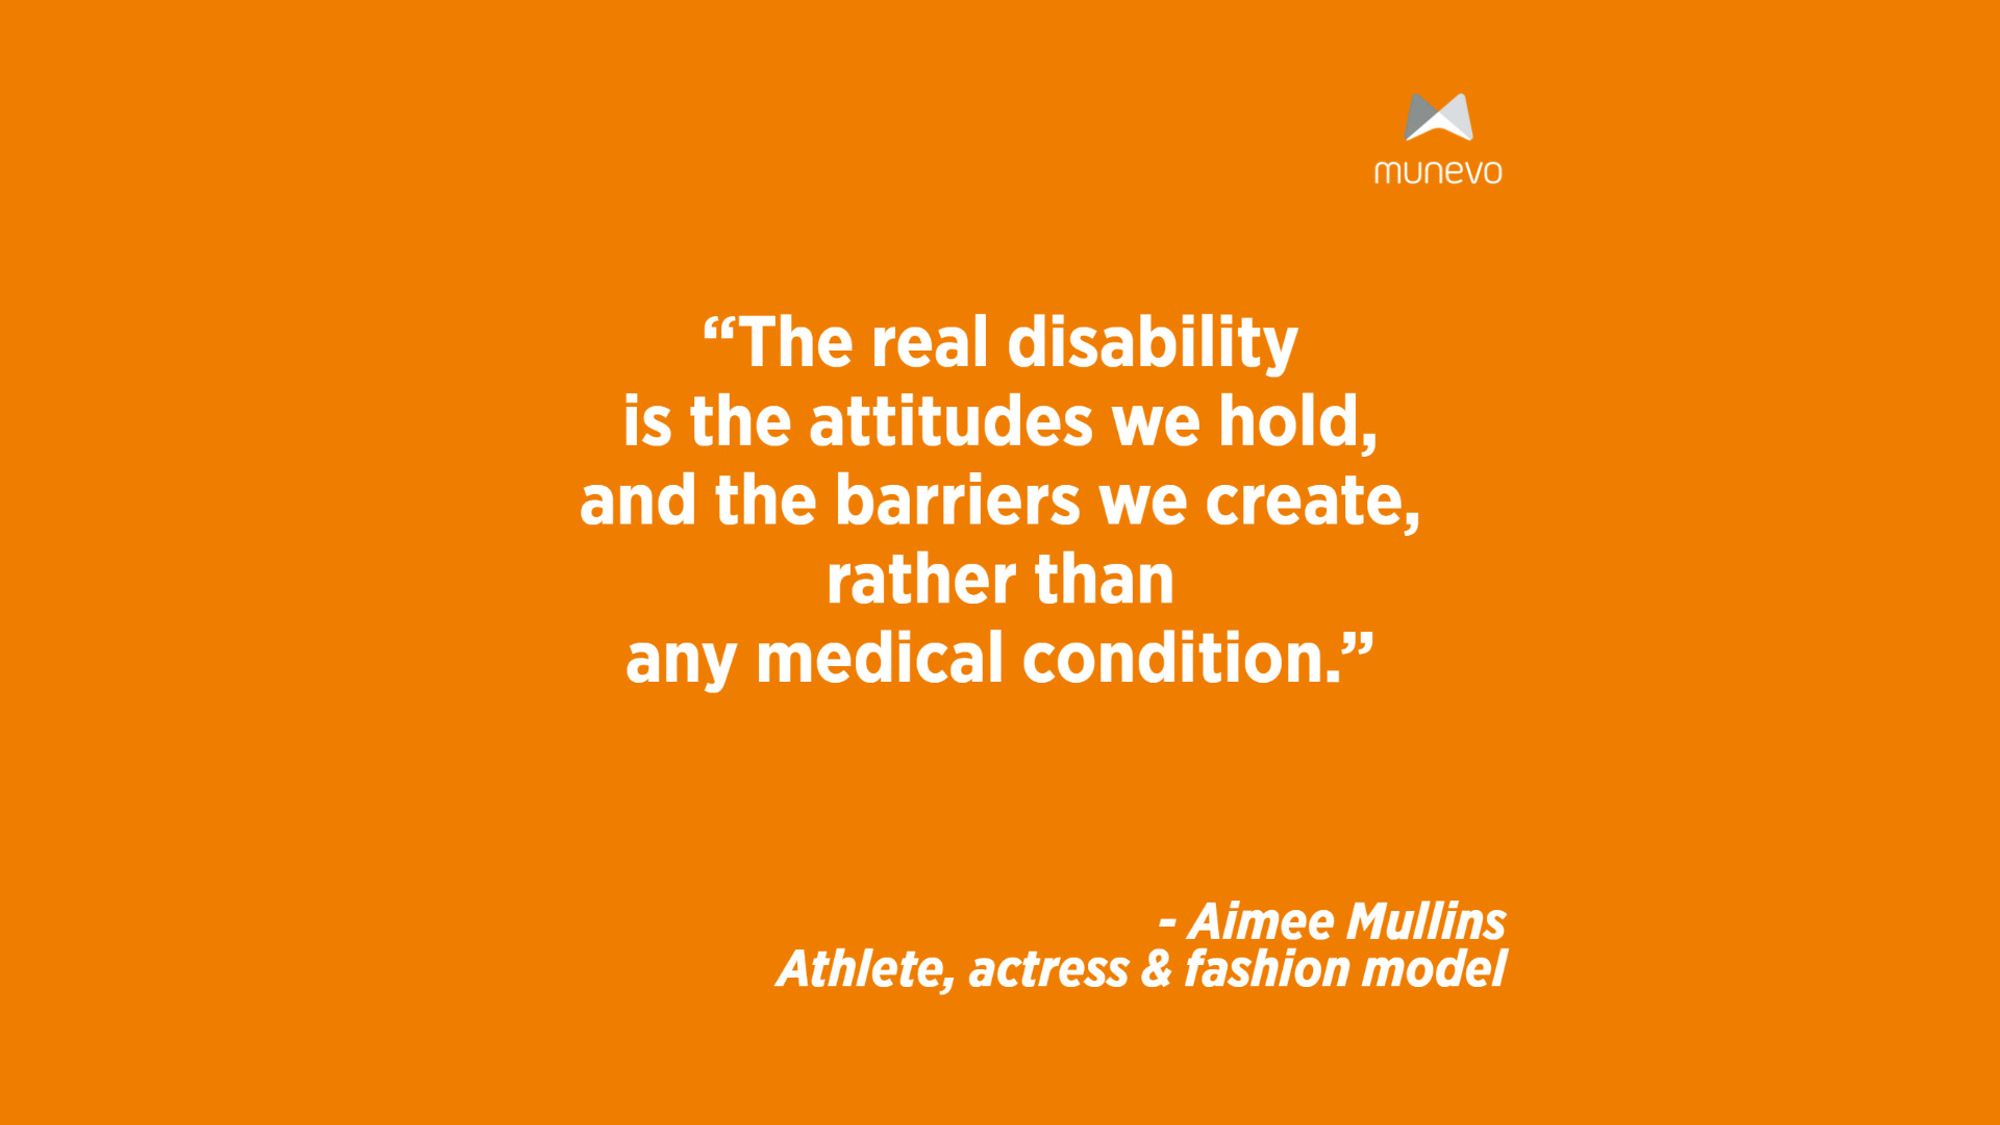 "The real disability is the attitudes we hold, and the barriers we create, rather than any medical condition." - Aimee Mullins Athlete, actress & fashion model